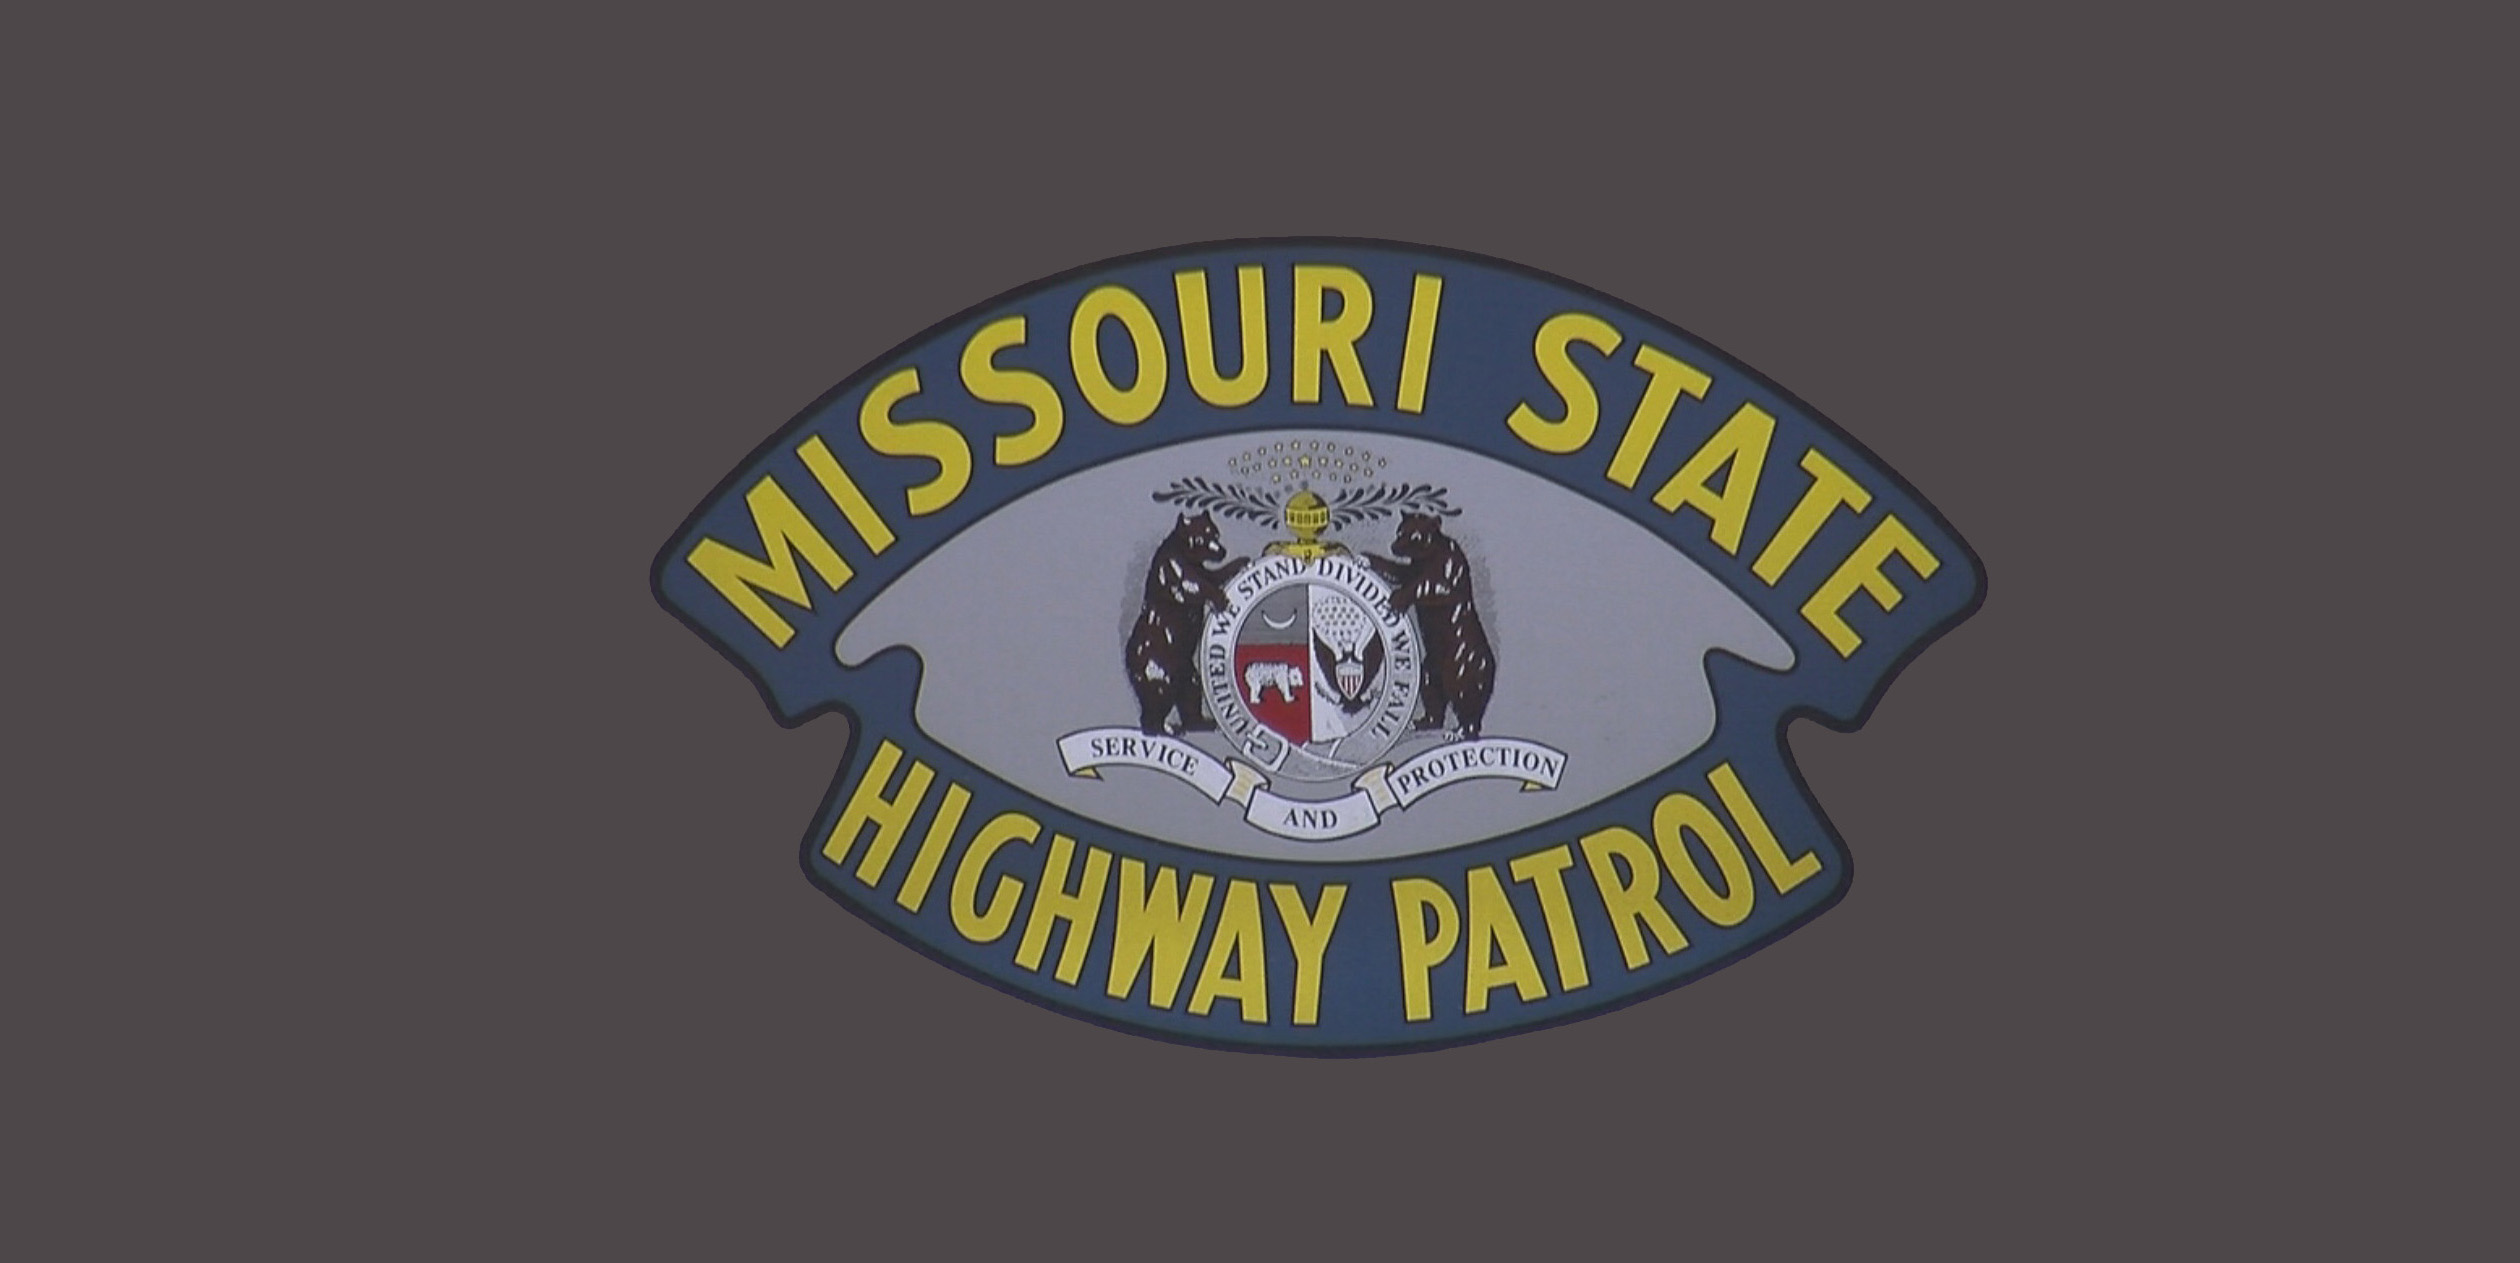 Troopers Arrest Two In Area Counties